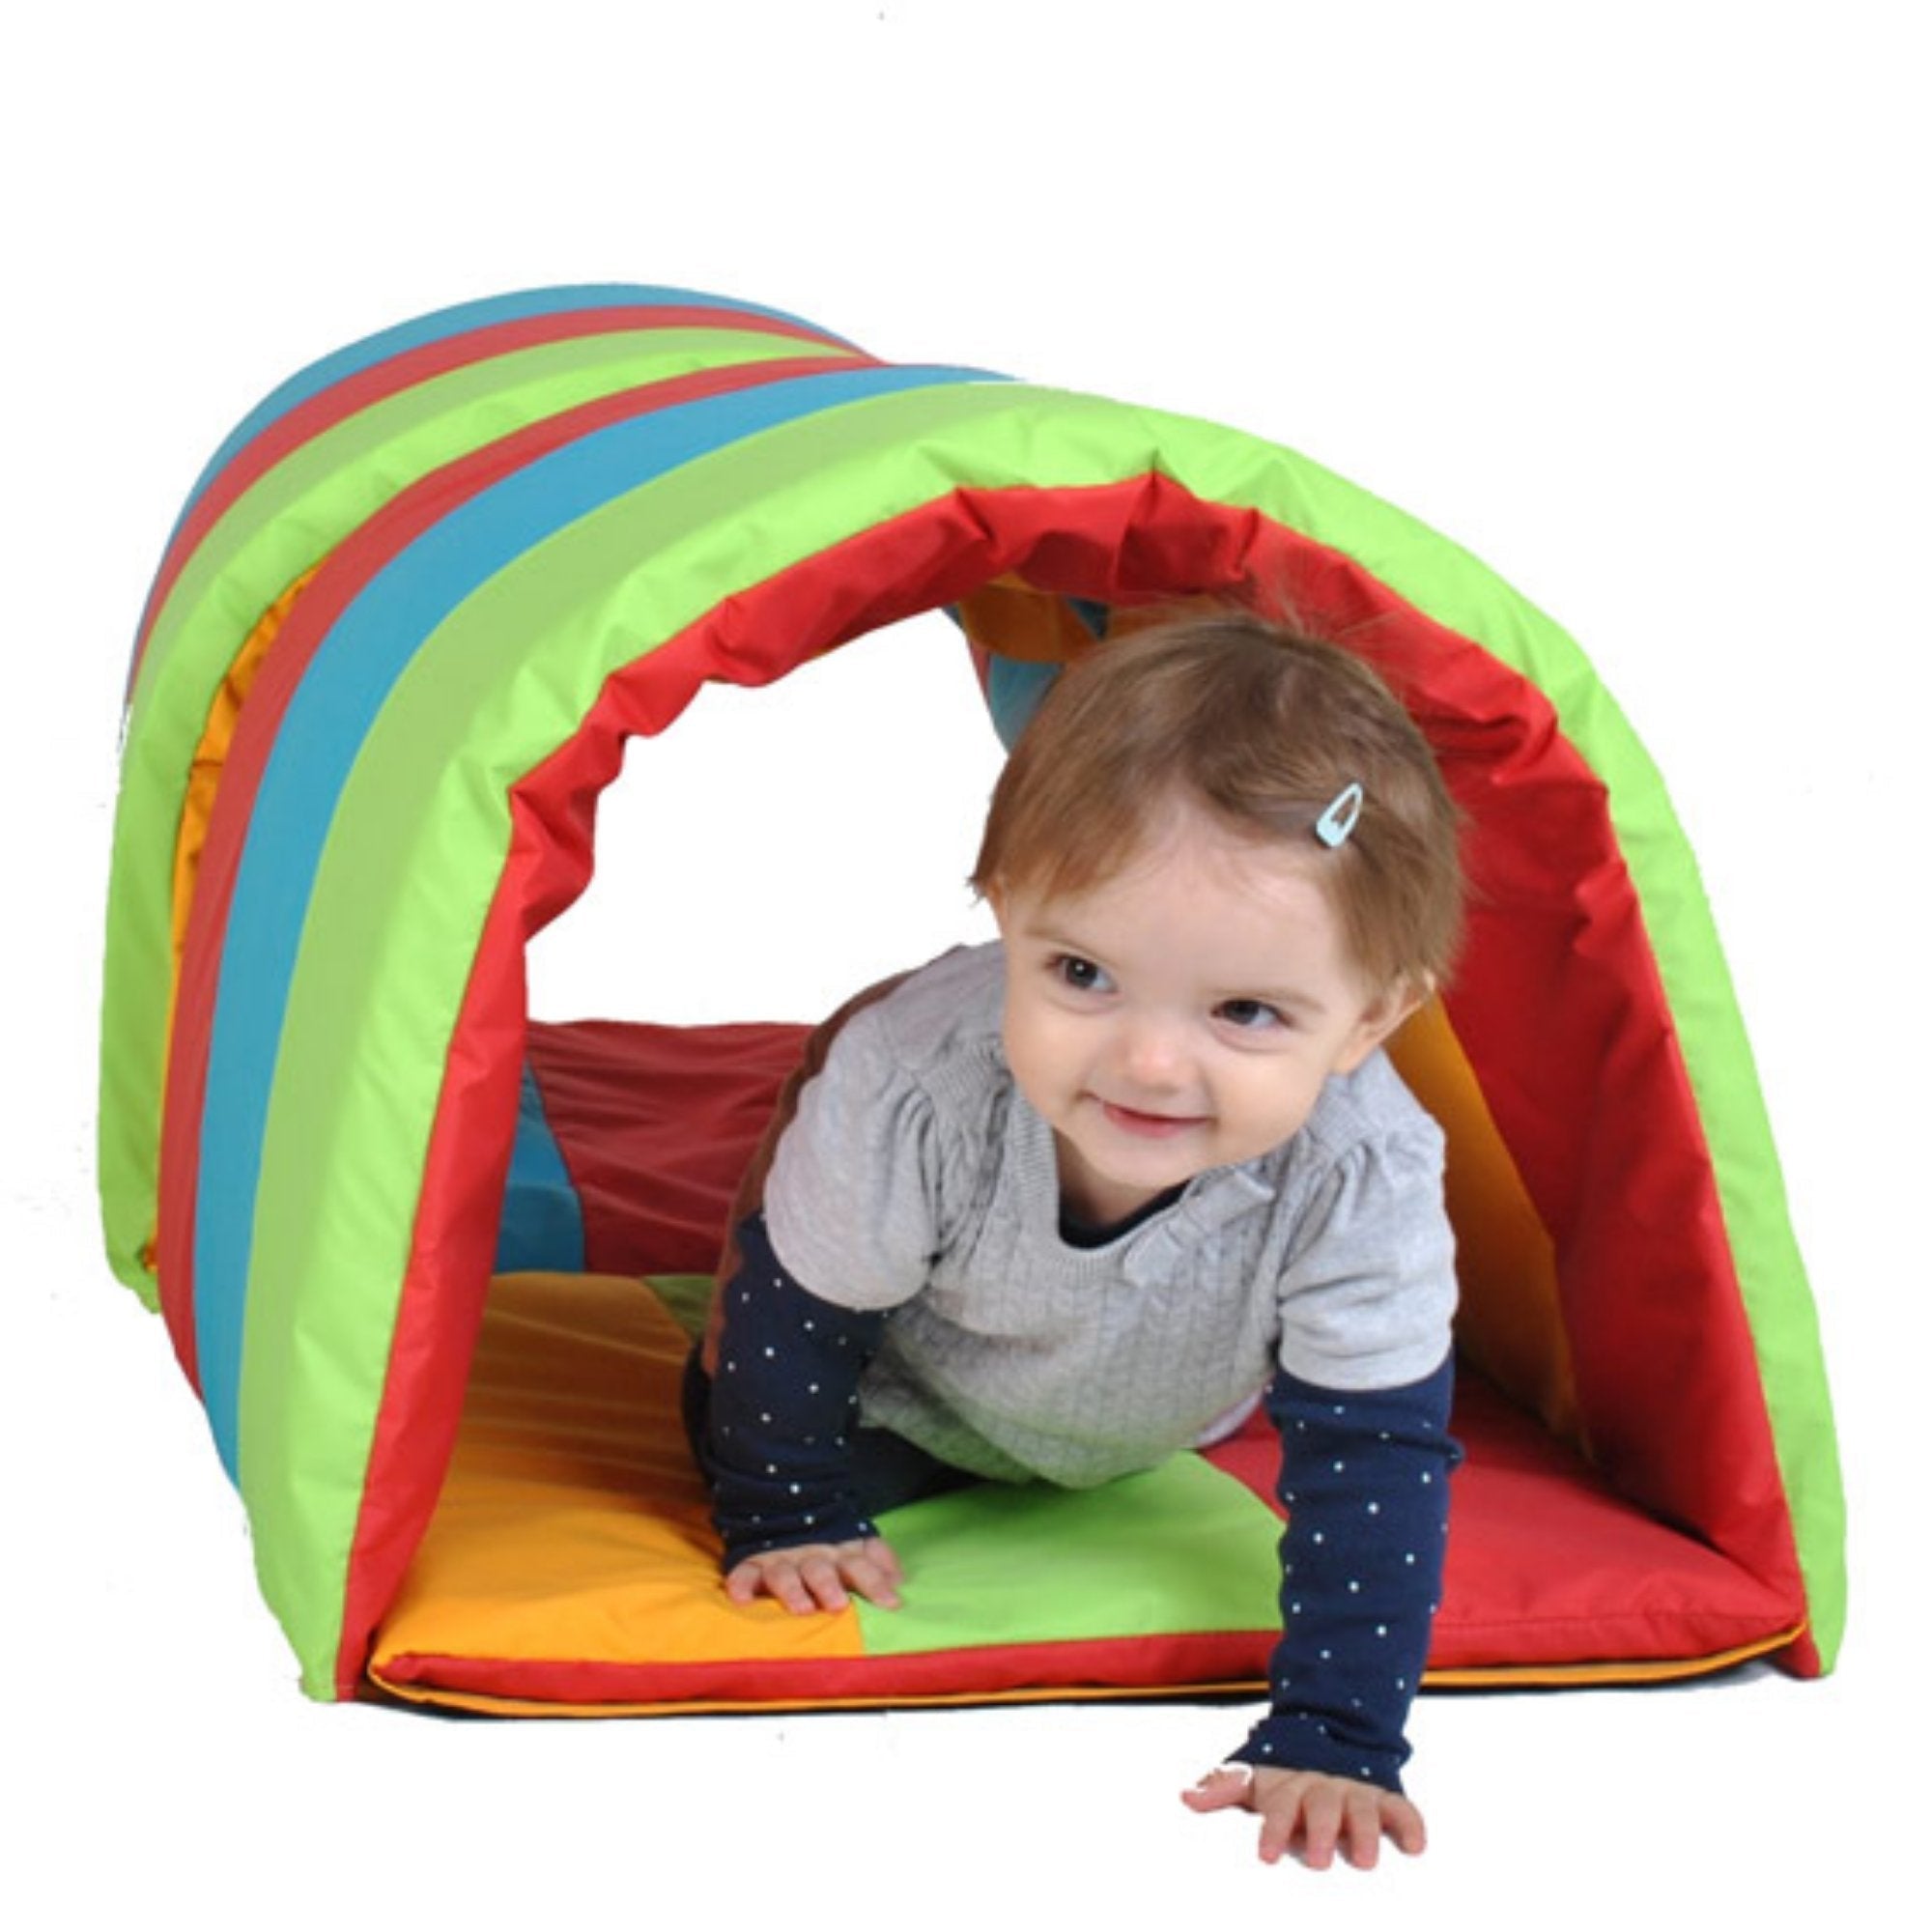 Soft Play Multi-Coloured Baby Crawl Tunnel, This Soft Play Multi-Coloured Baby Crawl Tunnel will make an ideal addition to your baby and toddler sensory corner. The Soft Play Multi-Coloured Baby Crawl Tunnel is a delightful, soft, appealing baby cushion designed in strong contrasting colours Emmersive indoor play enviroment for children. Made with heard wearning water resistant fabrics and a padded base 2 piece set. Suitable for indoor and outdoor use. Do not leave premanently outside. 50cm x 55cm x 52cm ea